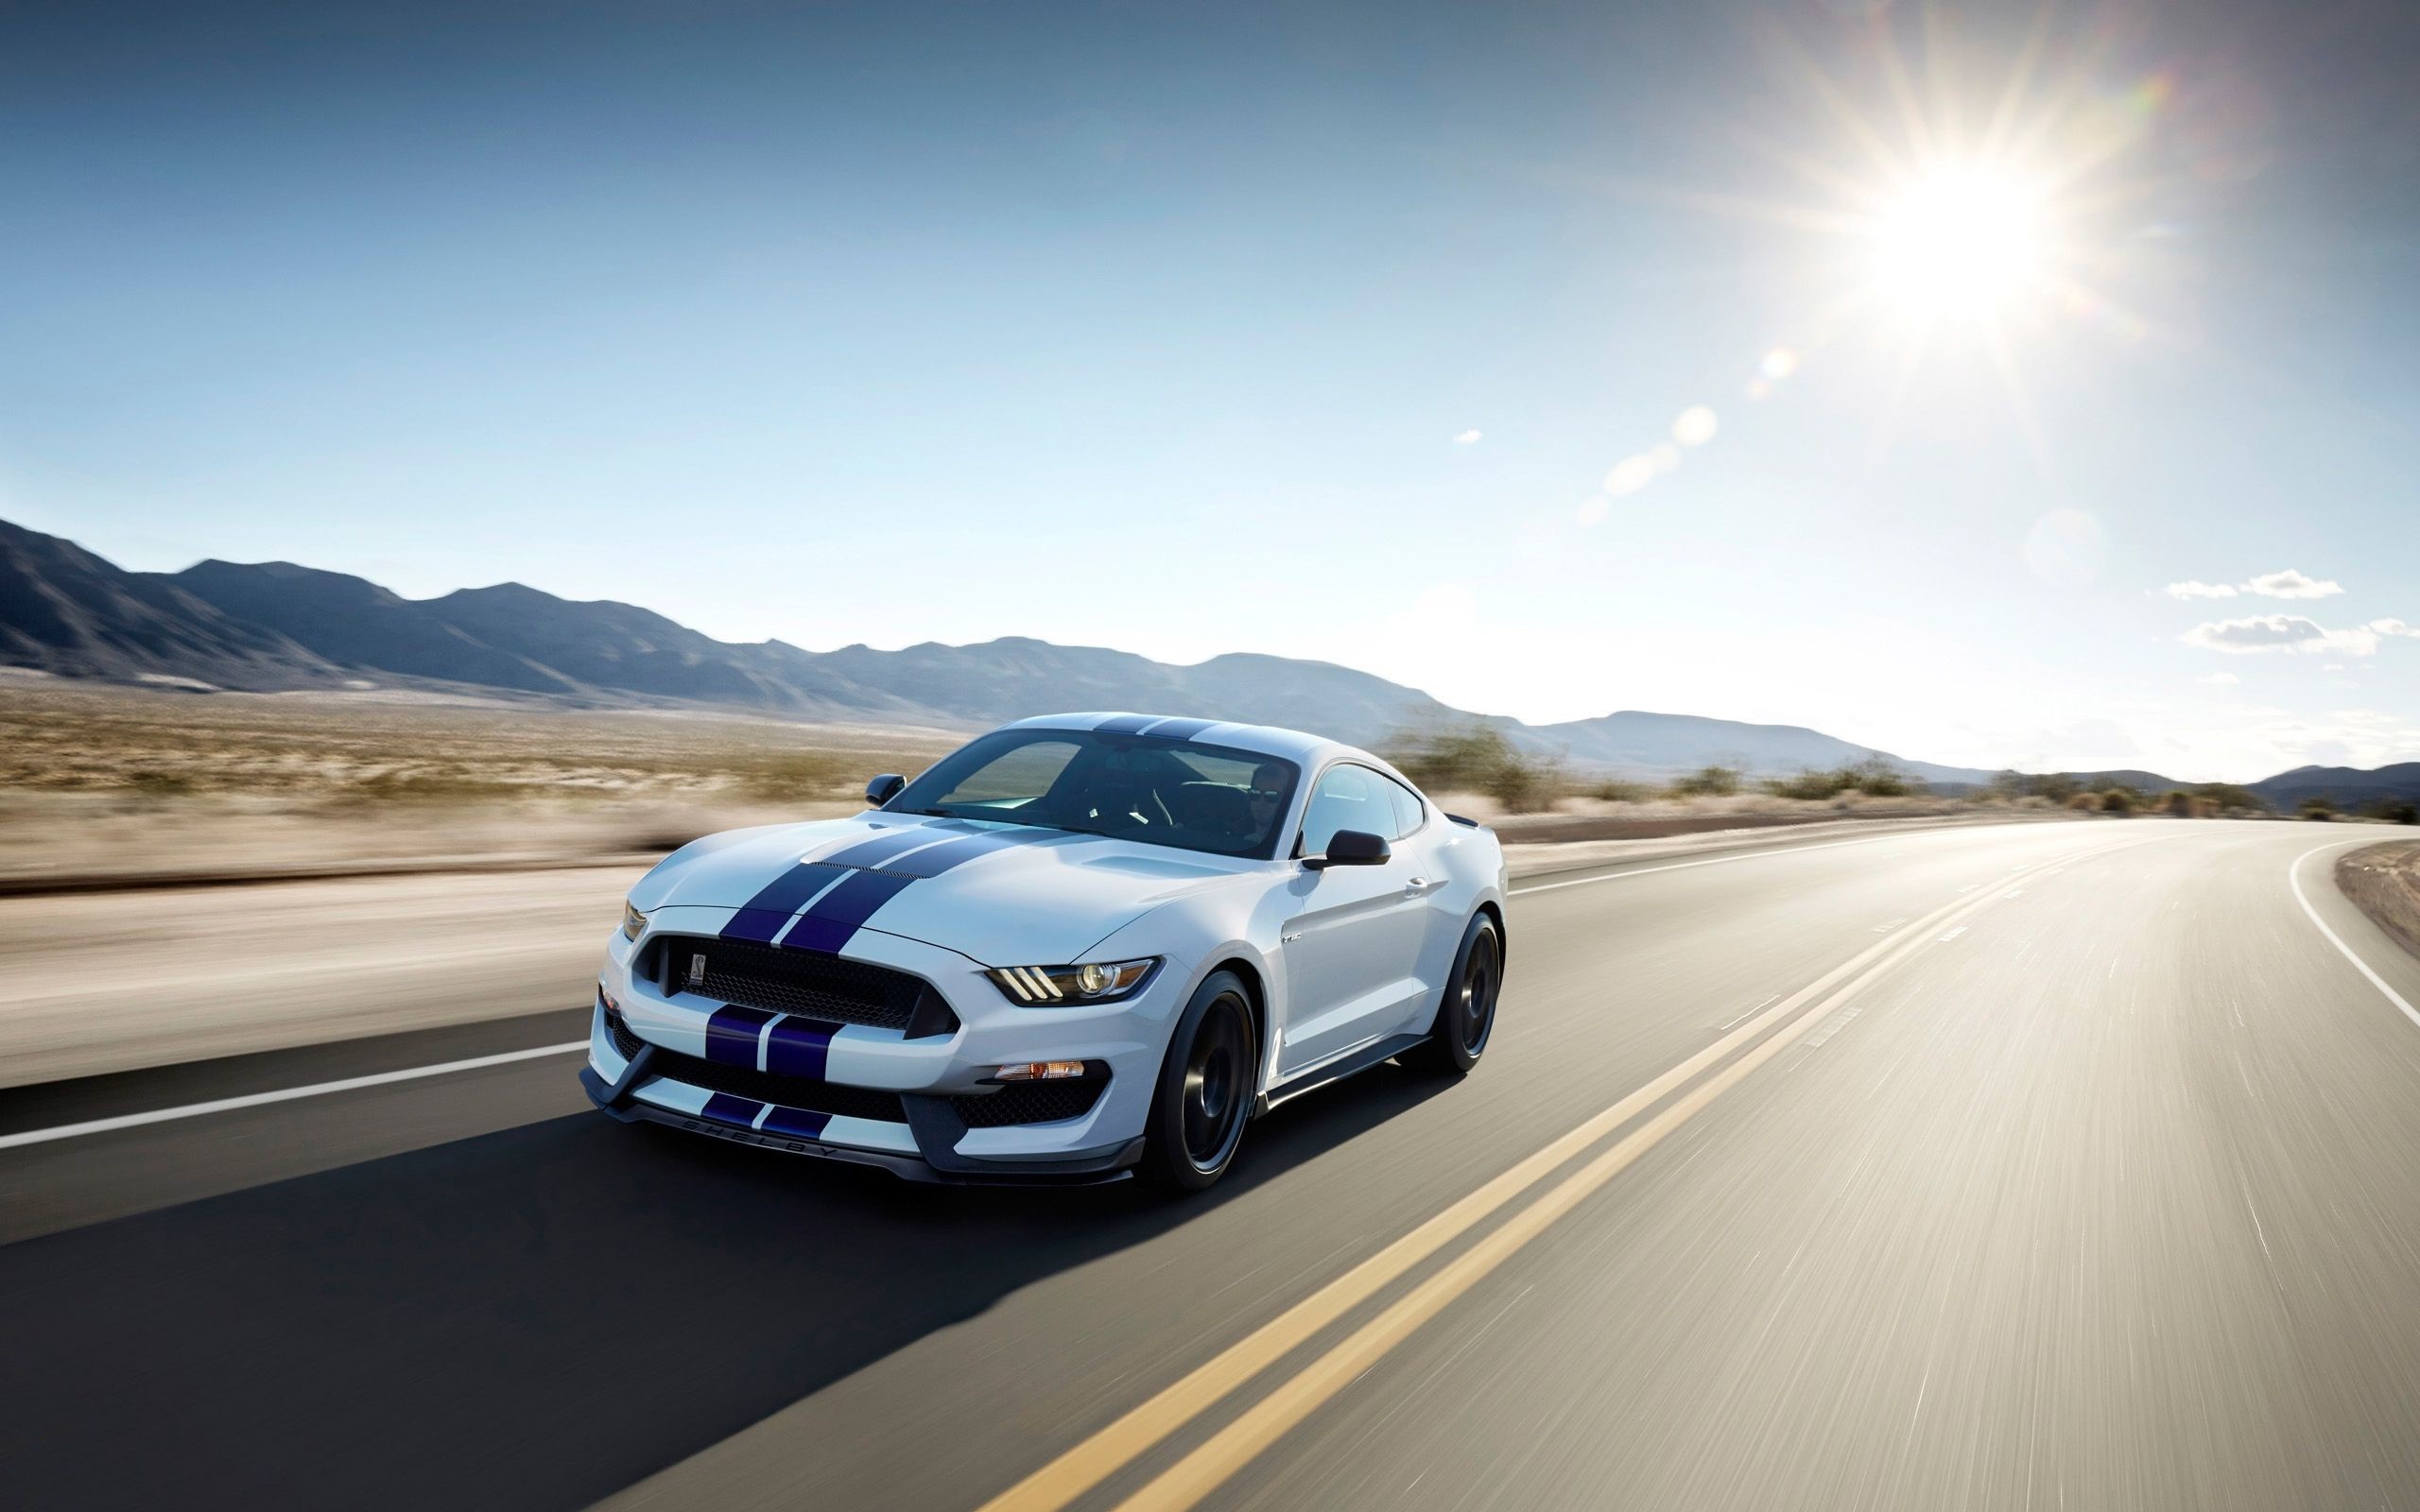 2560x1600 ...  76 entries in Mustang Wallpapers Free gro